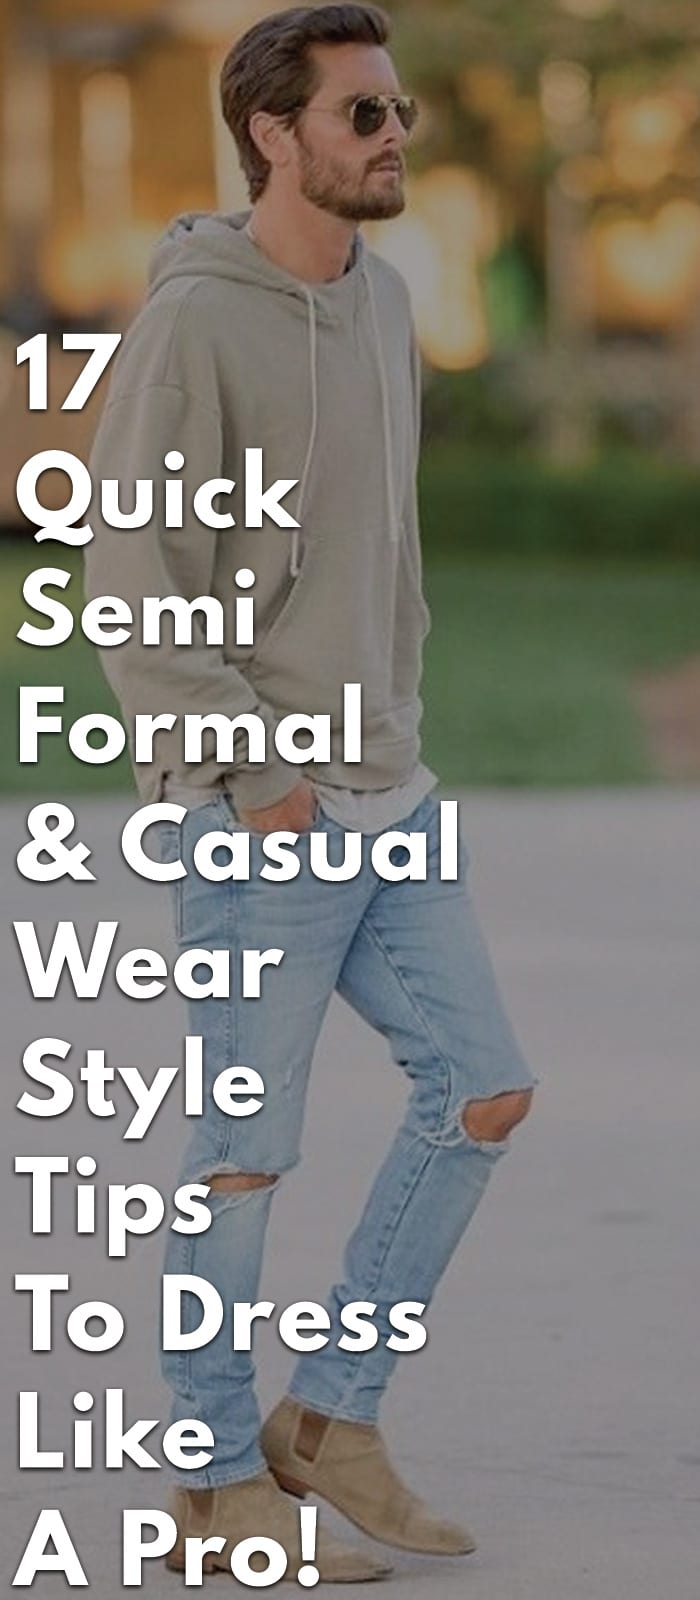 17-Quick-Semi-Formal-&-Casual-Wear-Style-Tips-To-Dress-Like-A-Pro!